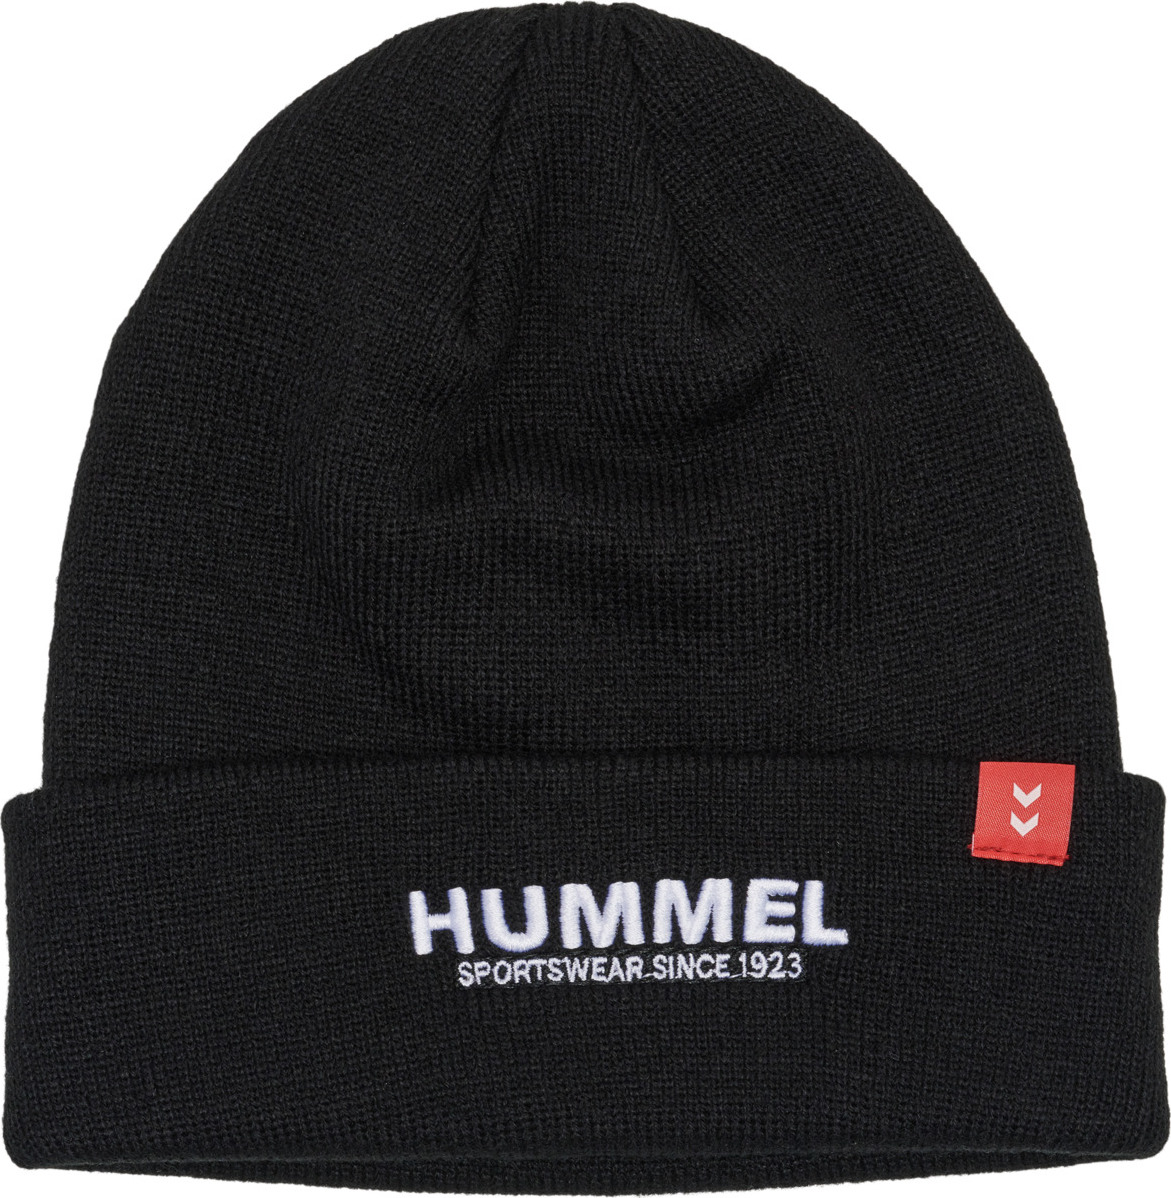 hmlLEGACY Black Core | Outnorth Core Black hmlLEGACY Buy Beanie here | Beanie